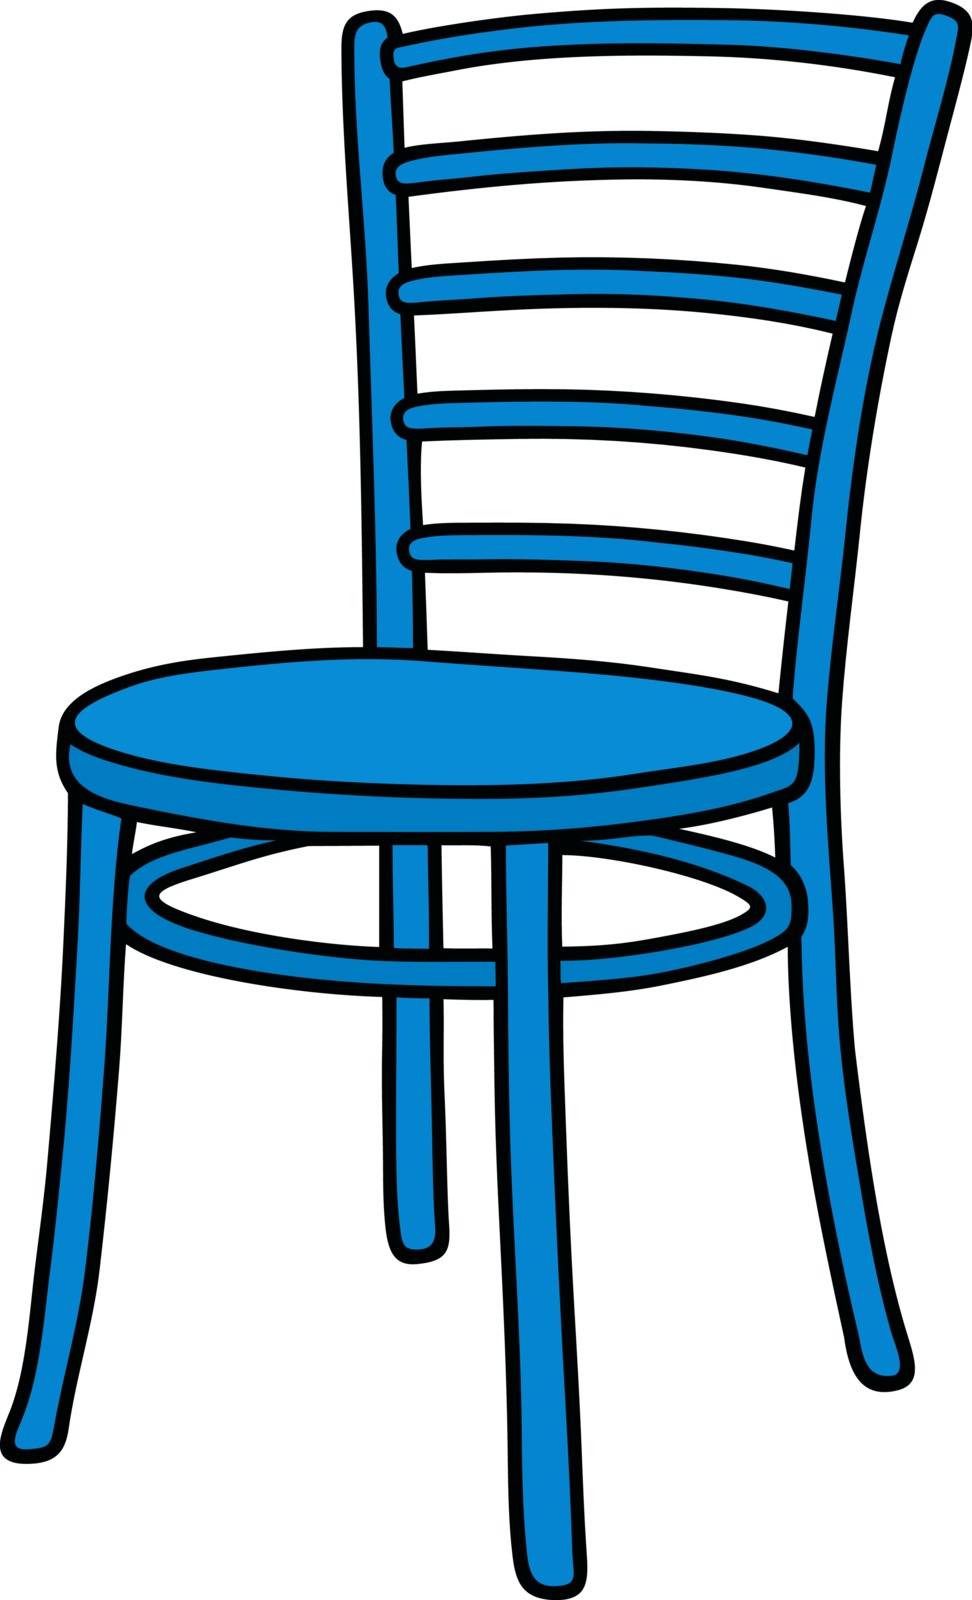 Hand drawing of a classic blue wooden chair